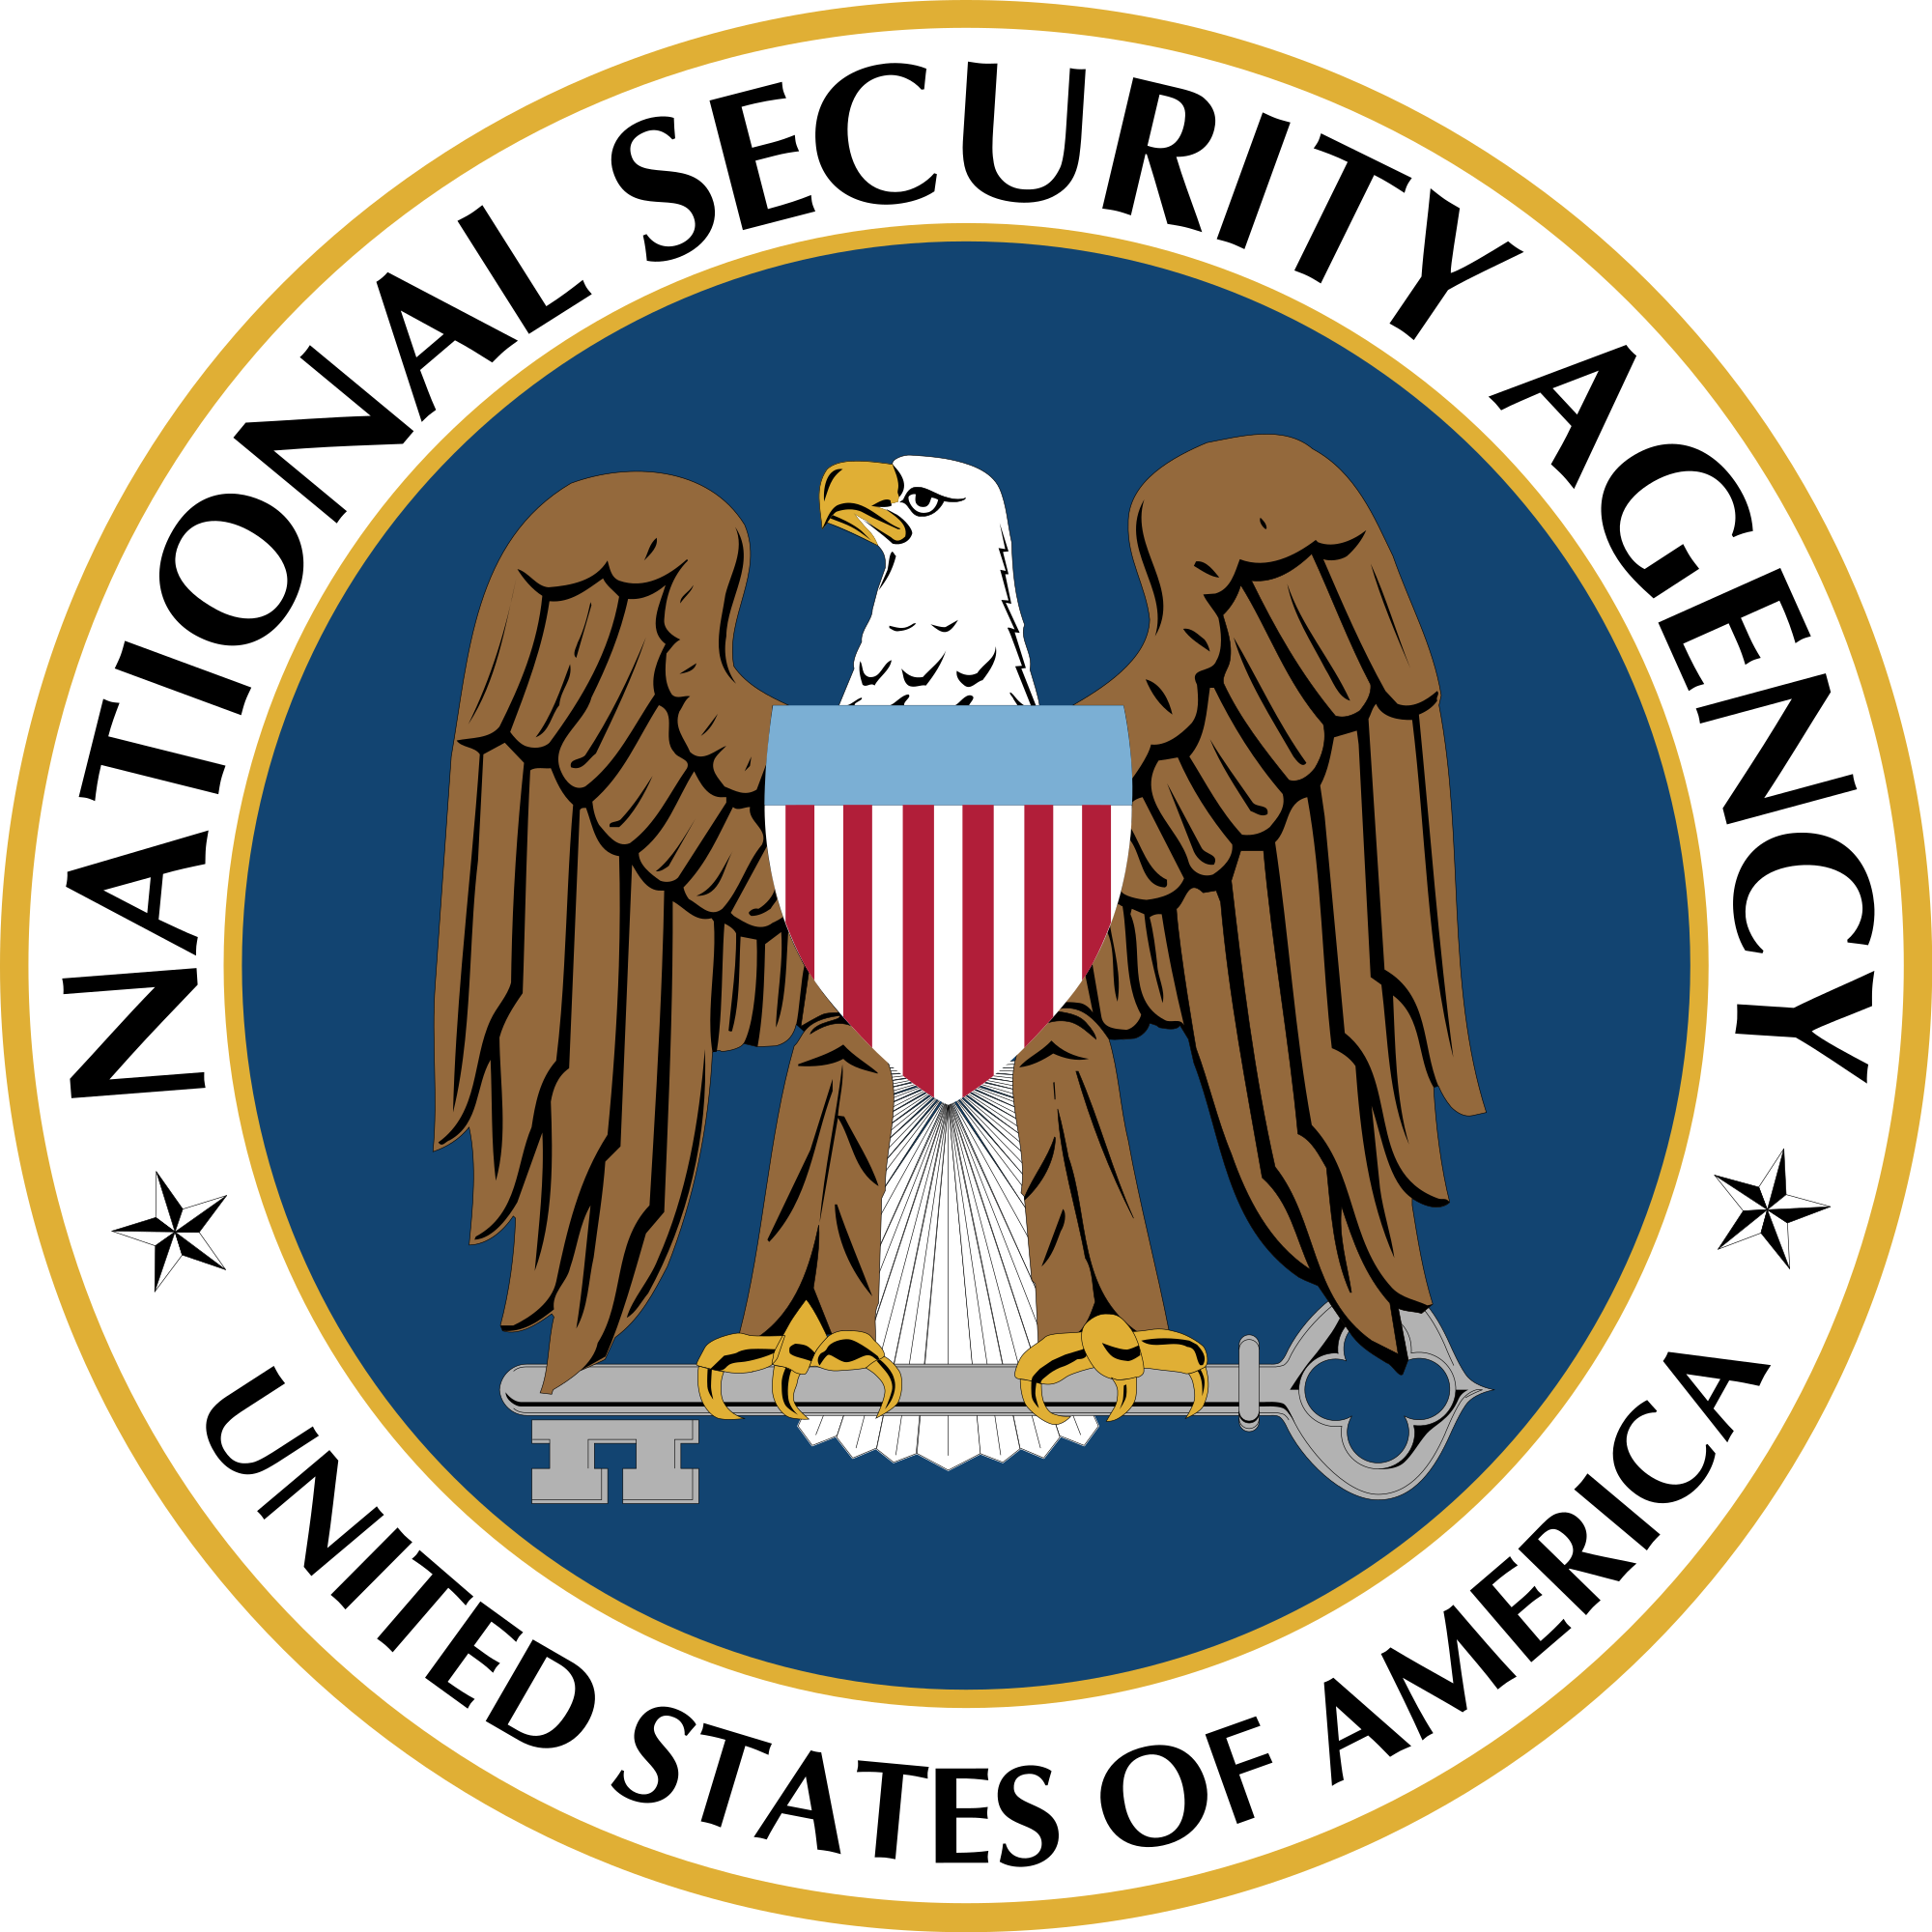 The Nsa Seal - National Security Agency Logo (2000x2000)